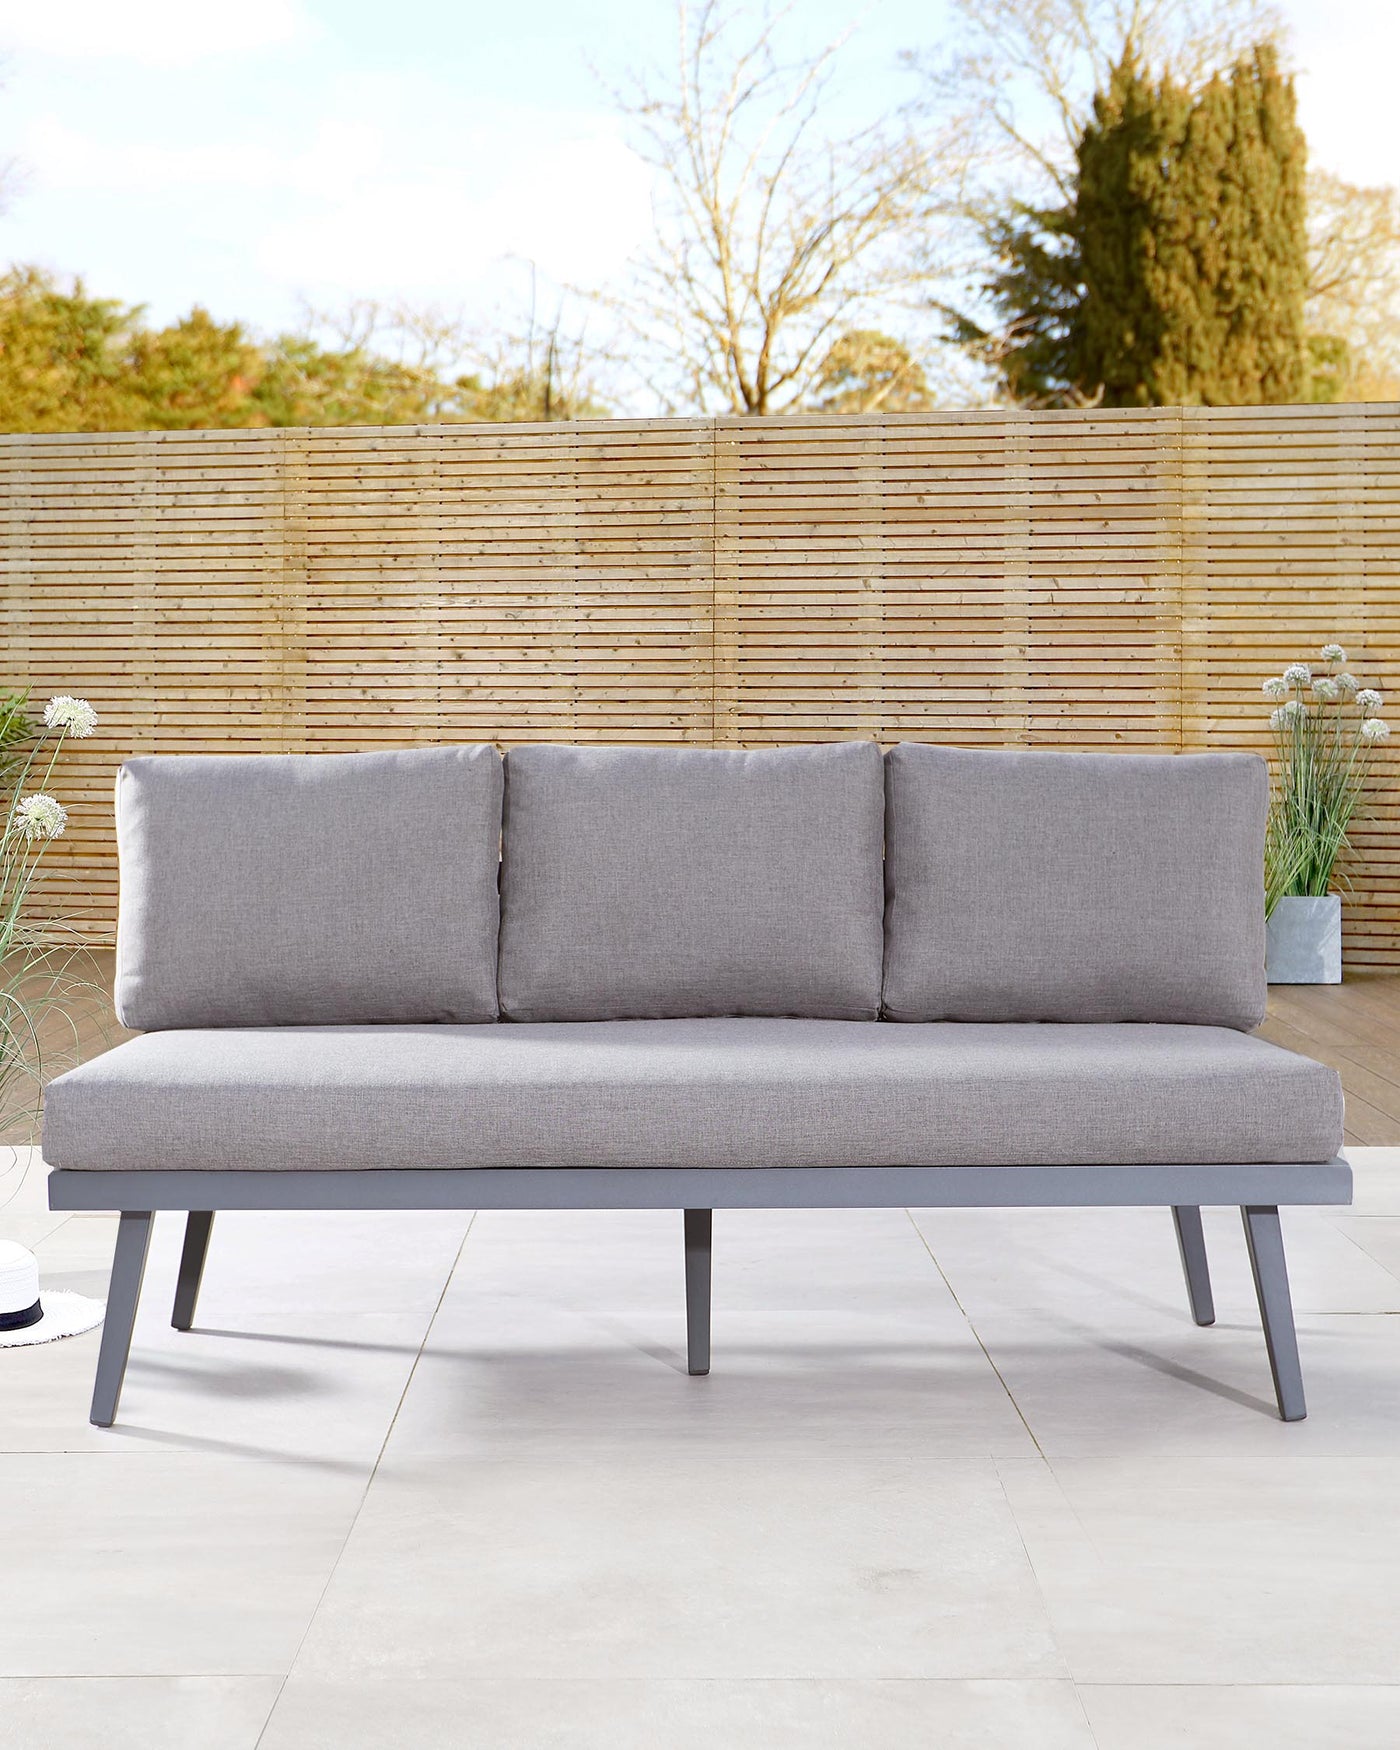 Contemporary outdoor three-seater sofa with a minimalist design, featuring a sleek grey metal frame and light grey upholstered cushions. The sofa is positioned on a patio with a natural wooden fence in the background.